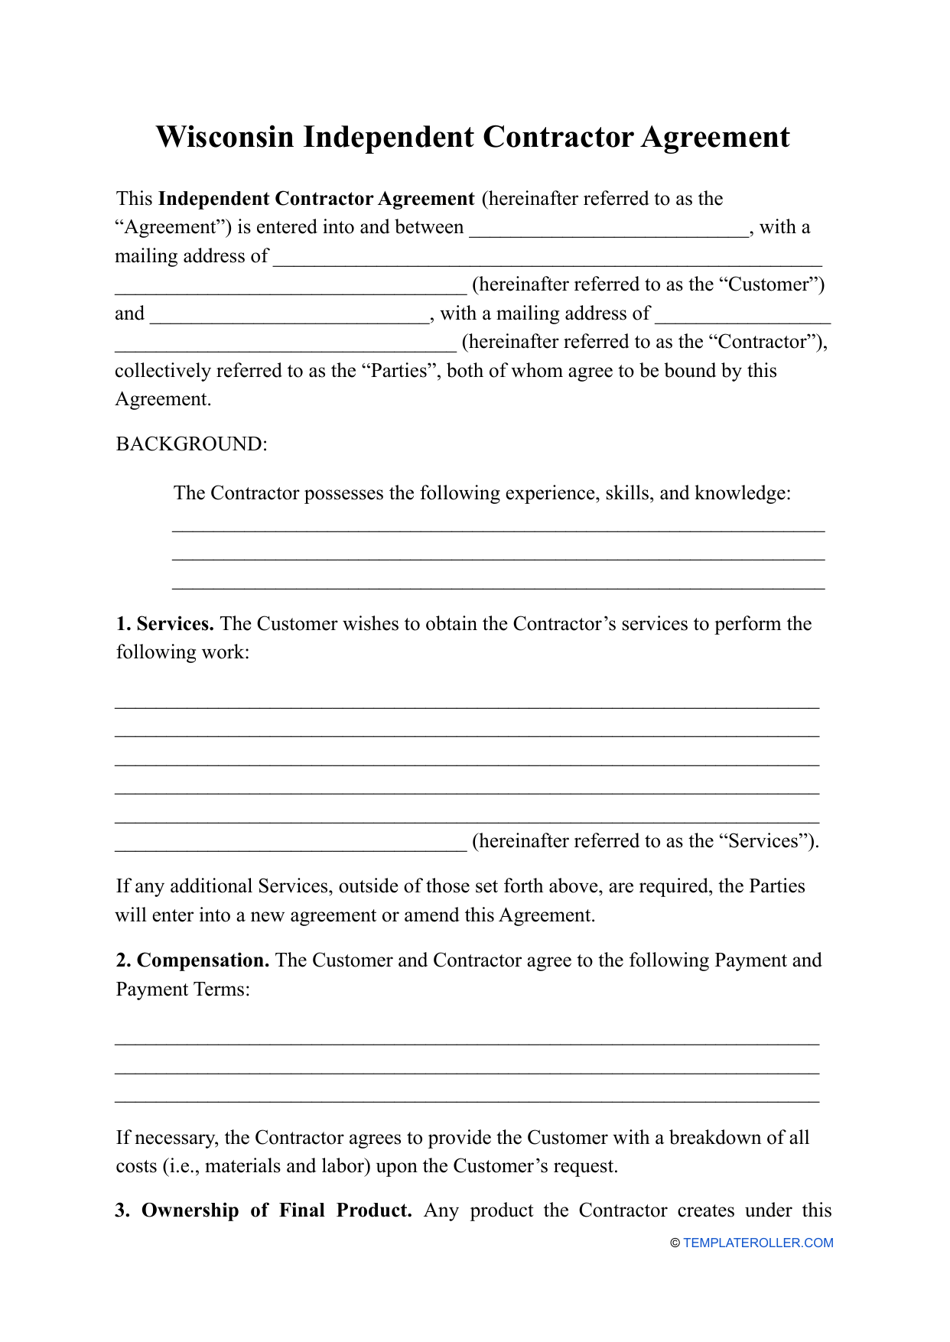 Independent Contractor Agreement Template - Wisconsin, Page 1